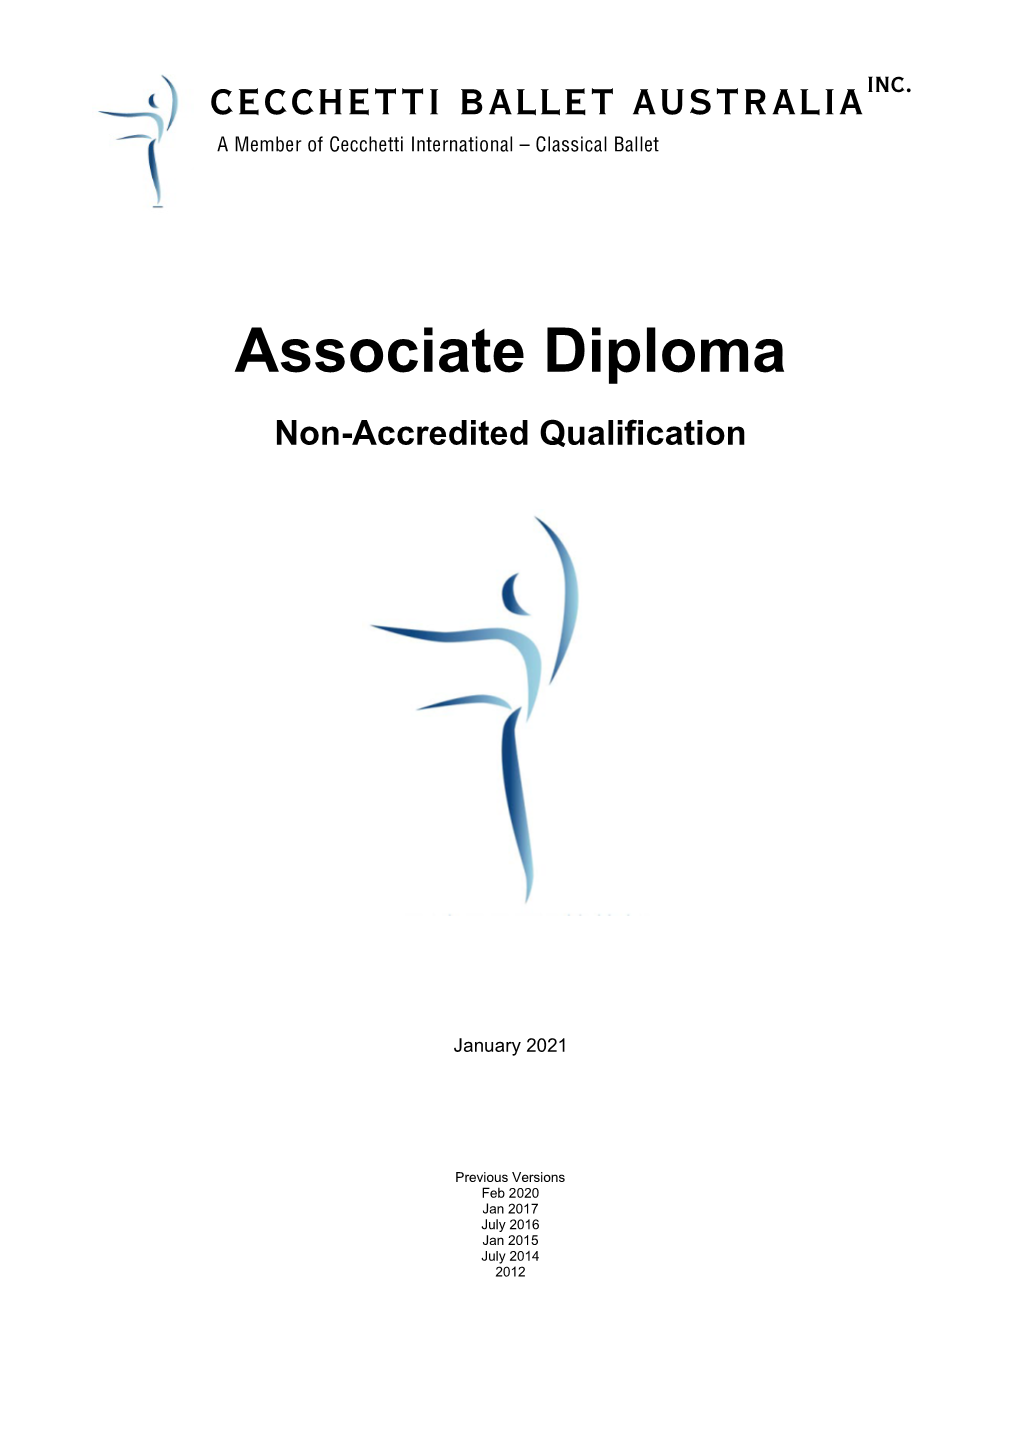 Associate Diploma Non-Accredited Qualification